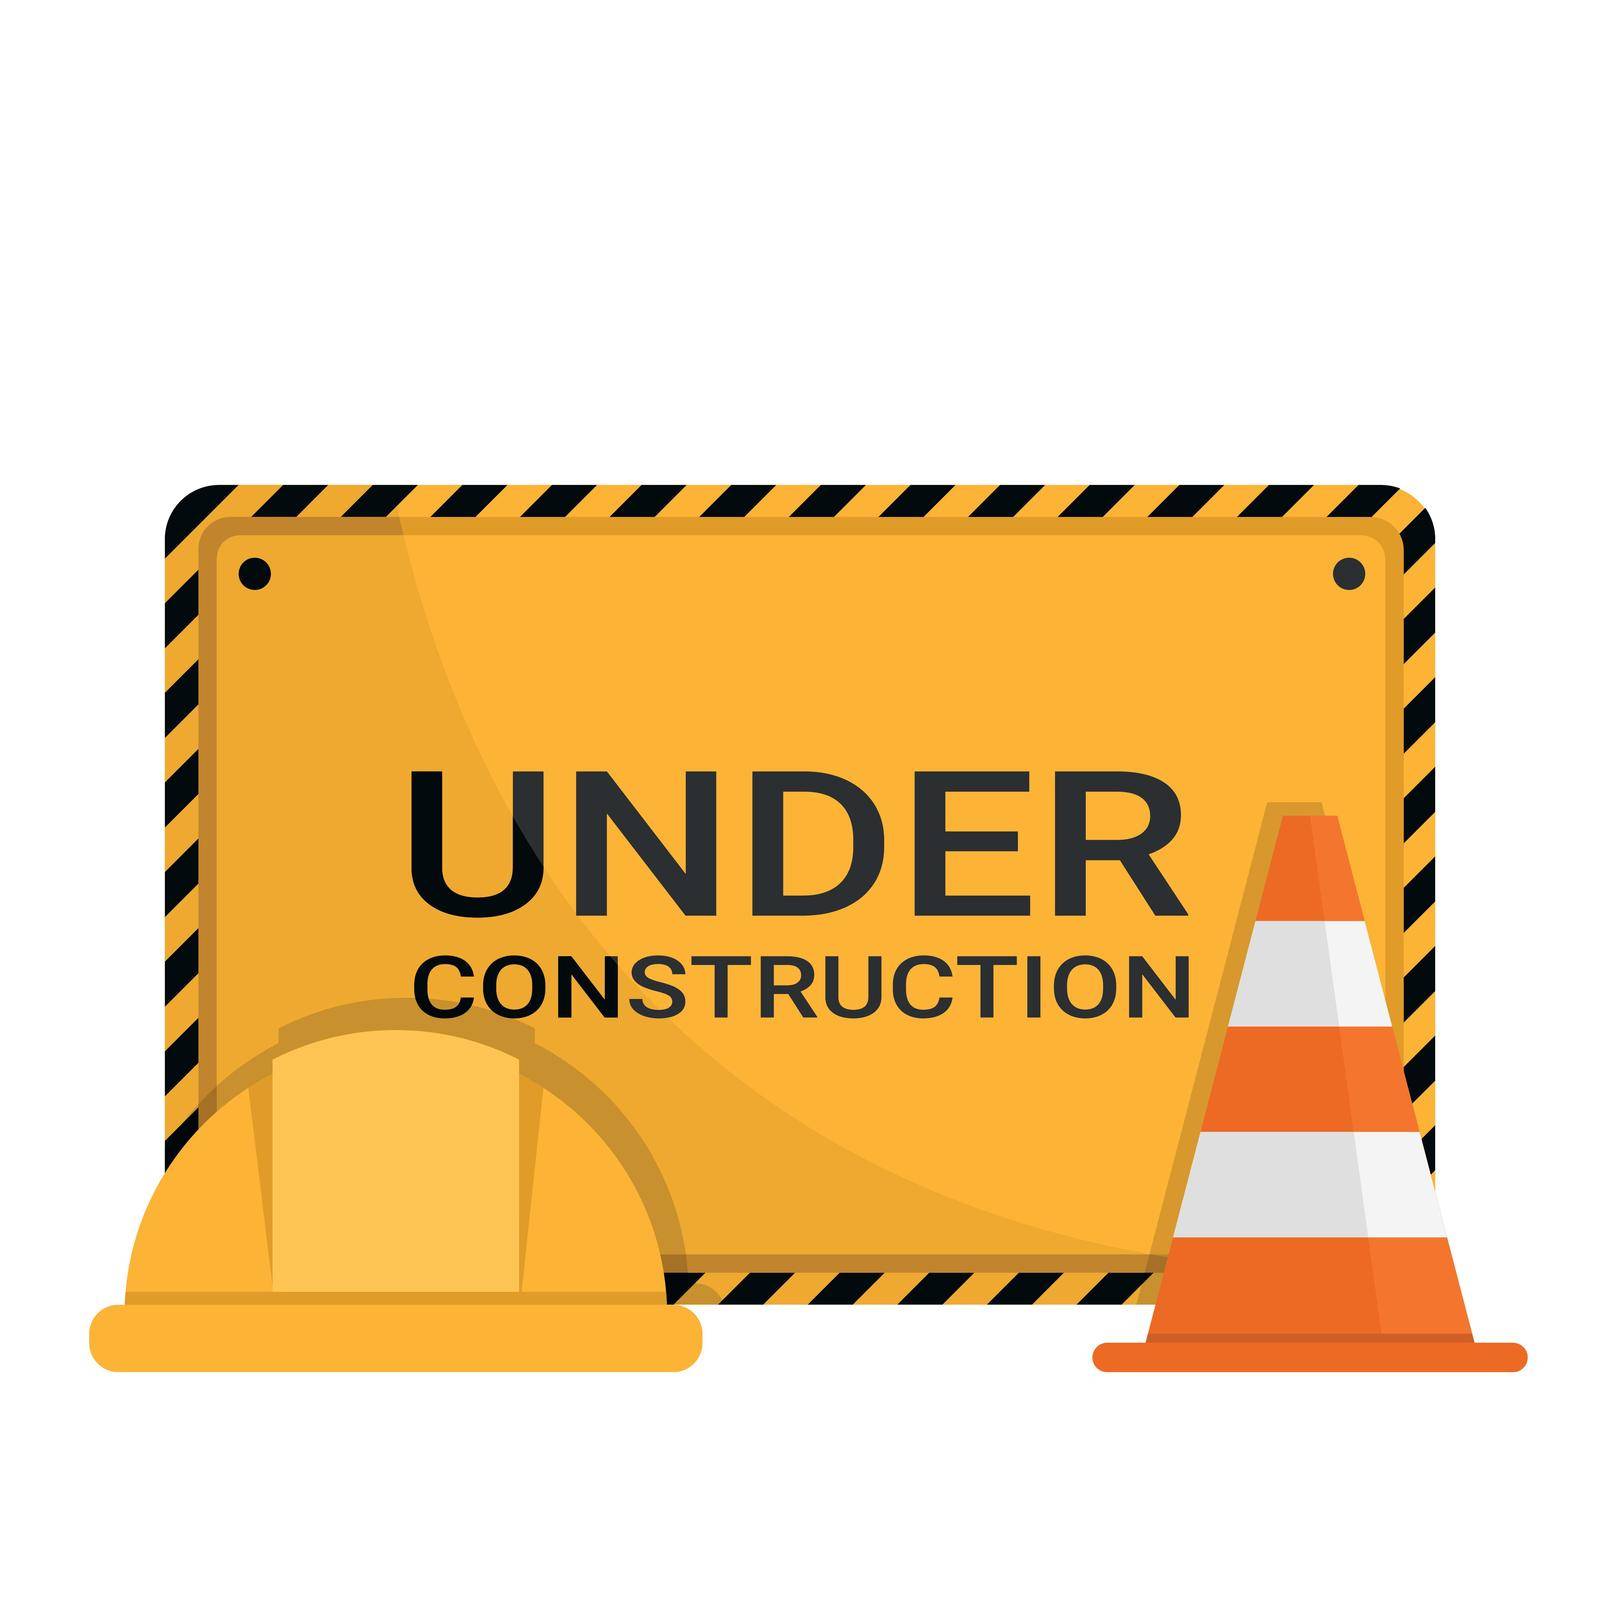 Under construction advertising sign with safety cone and safety helmet